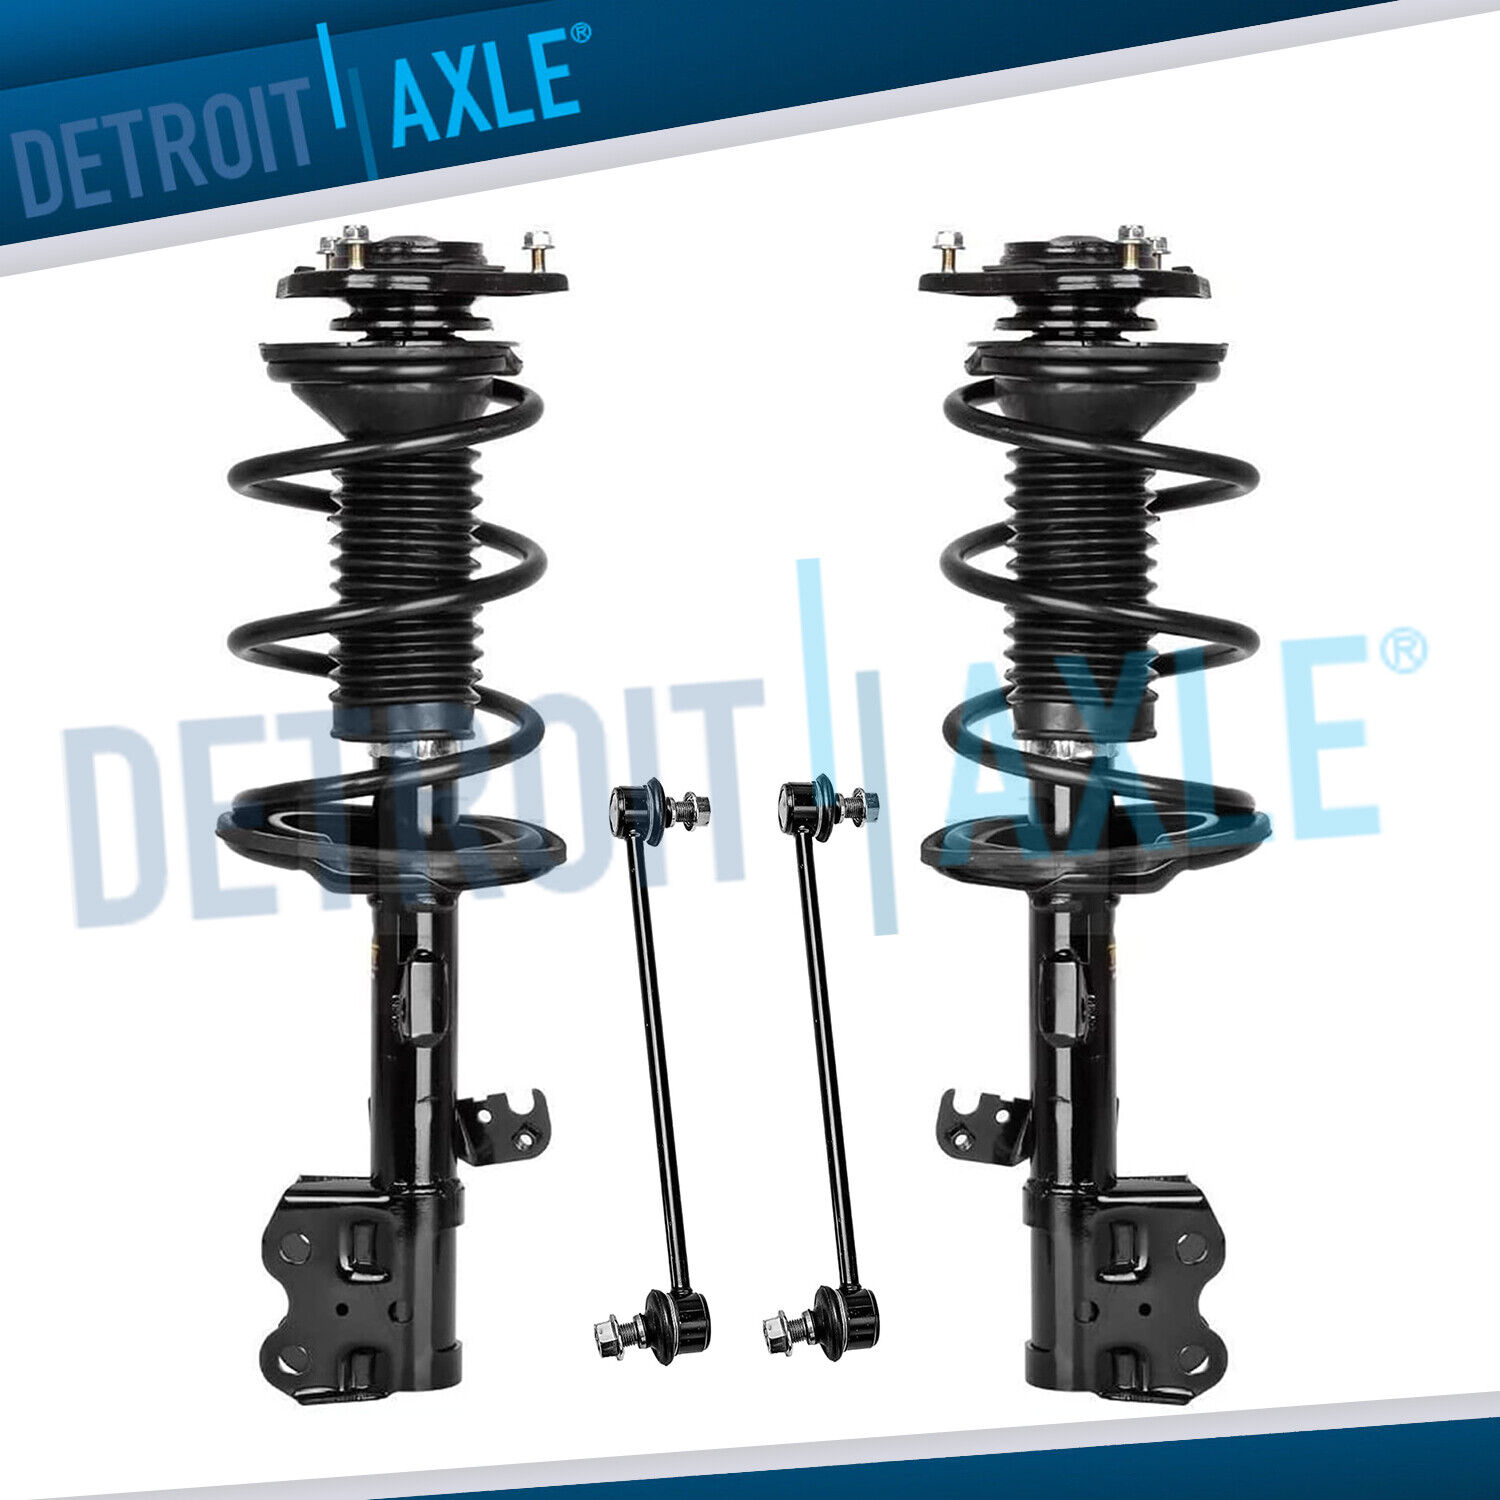 4pc Front Struts & Sway Bar Links for 2004 2005 2006 2007 2008 2009 Toyota Prius